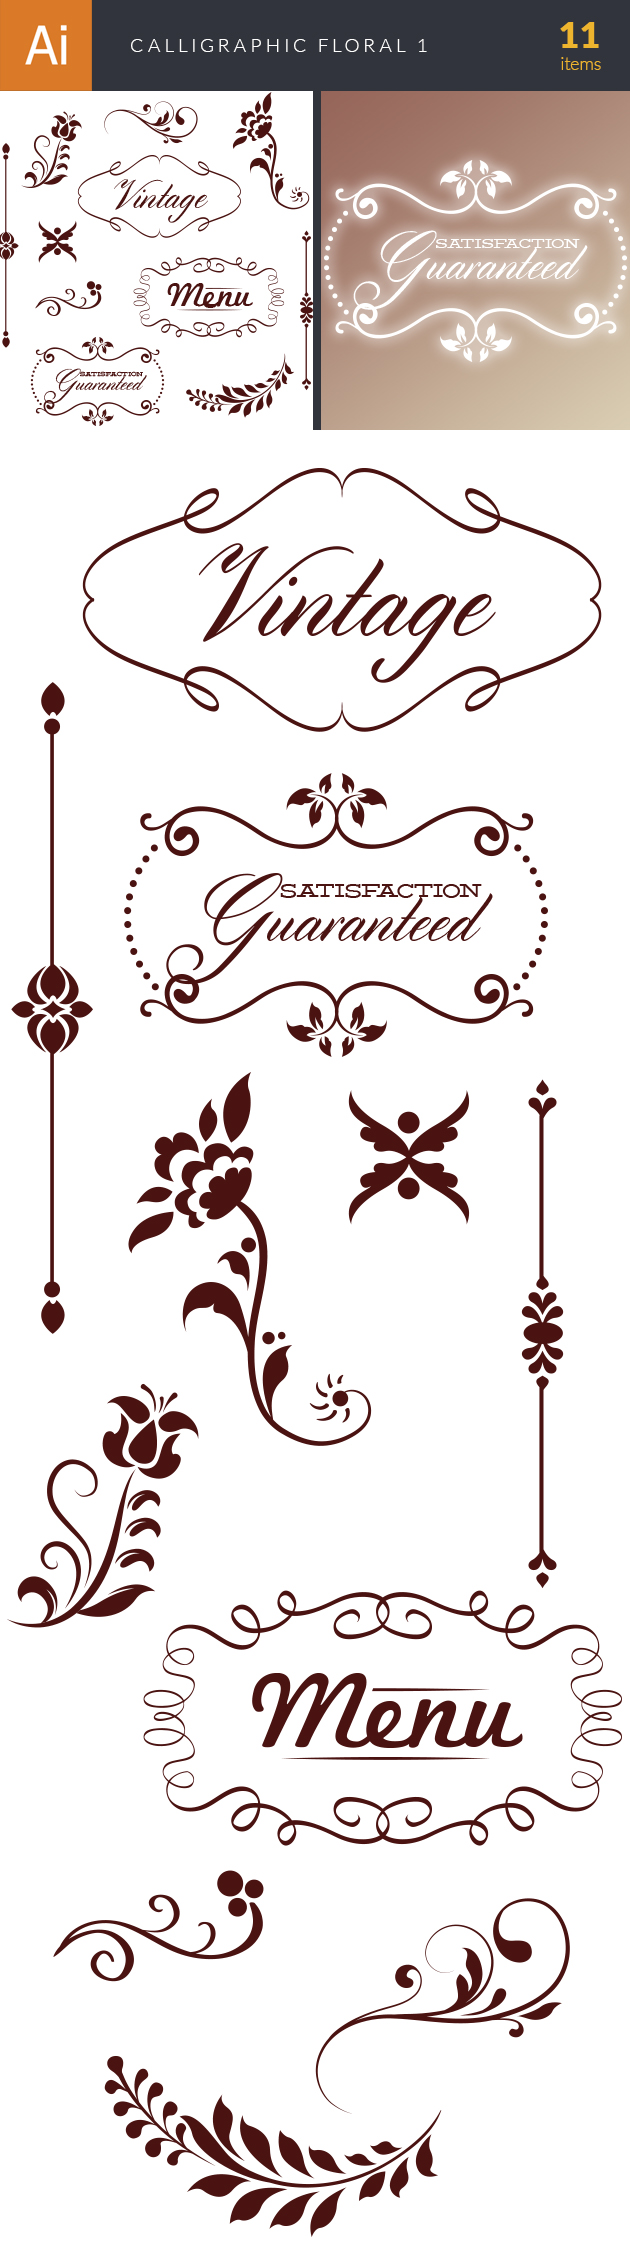 Calligraphic Floral Vector Set 1 2